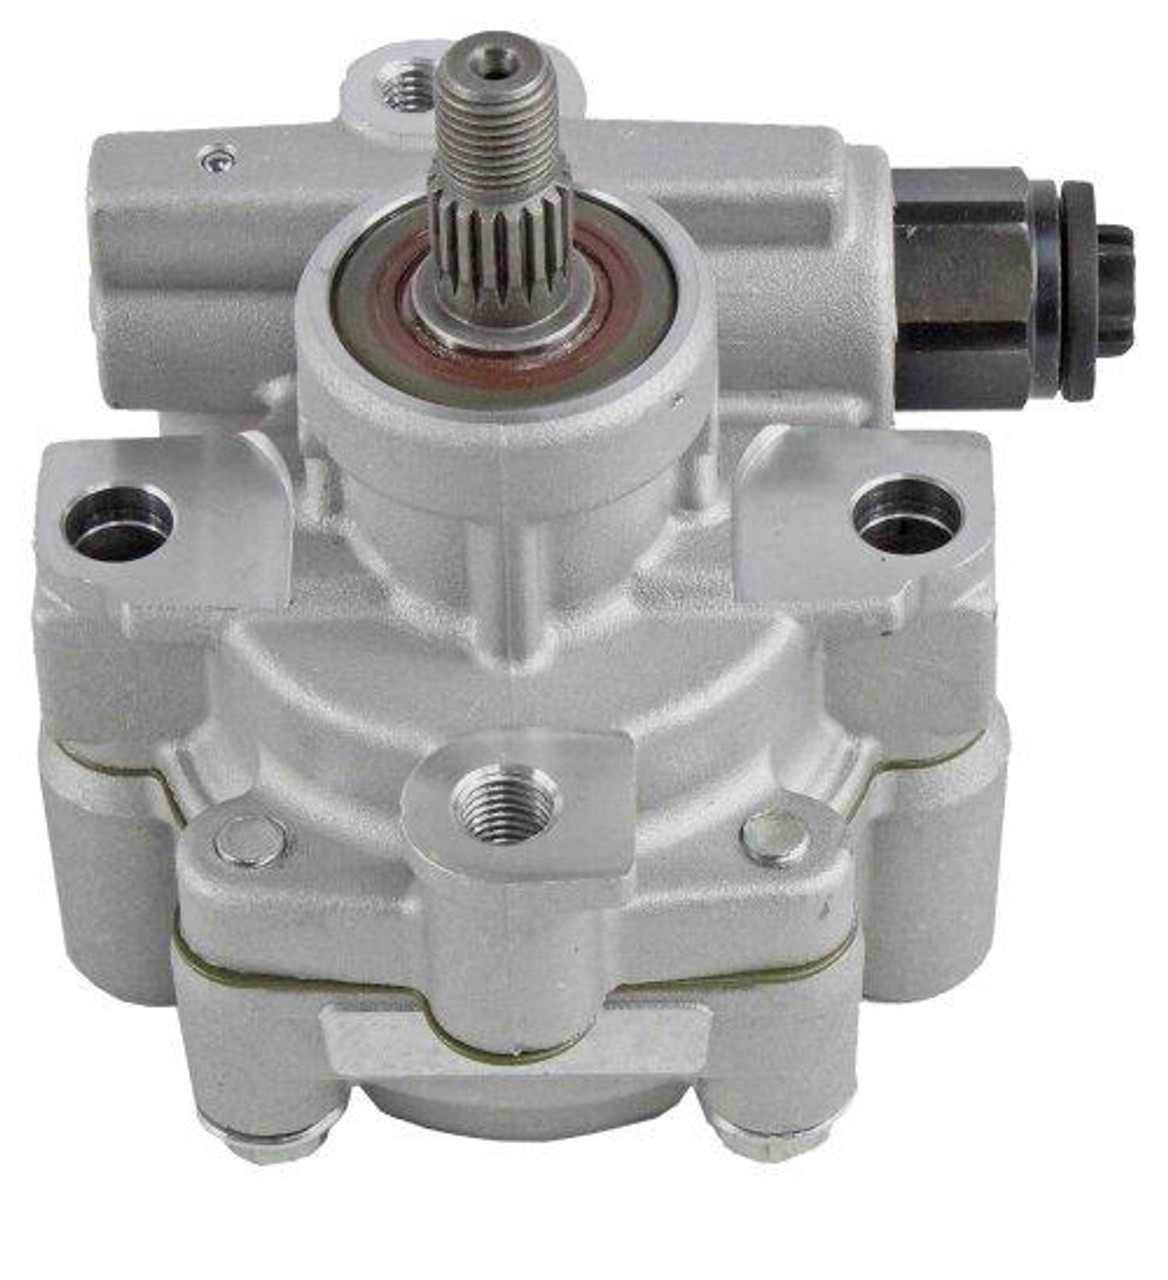 Power Steering Pump - 2000 Toyota Camry 3.0L Engine Parts # PSP1214ZE23